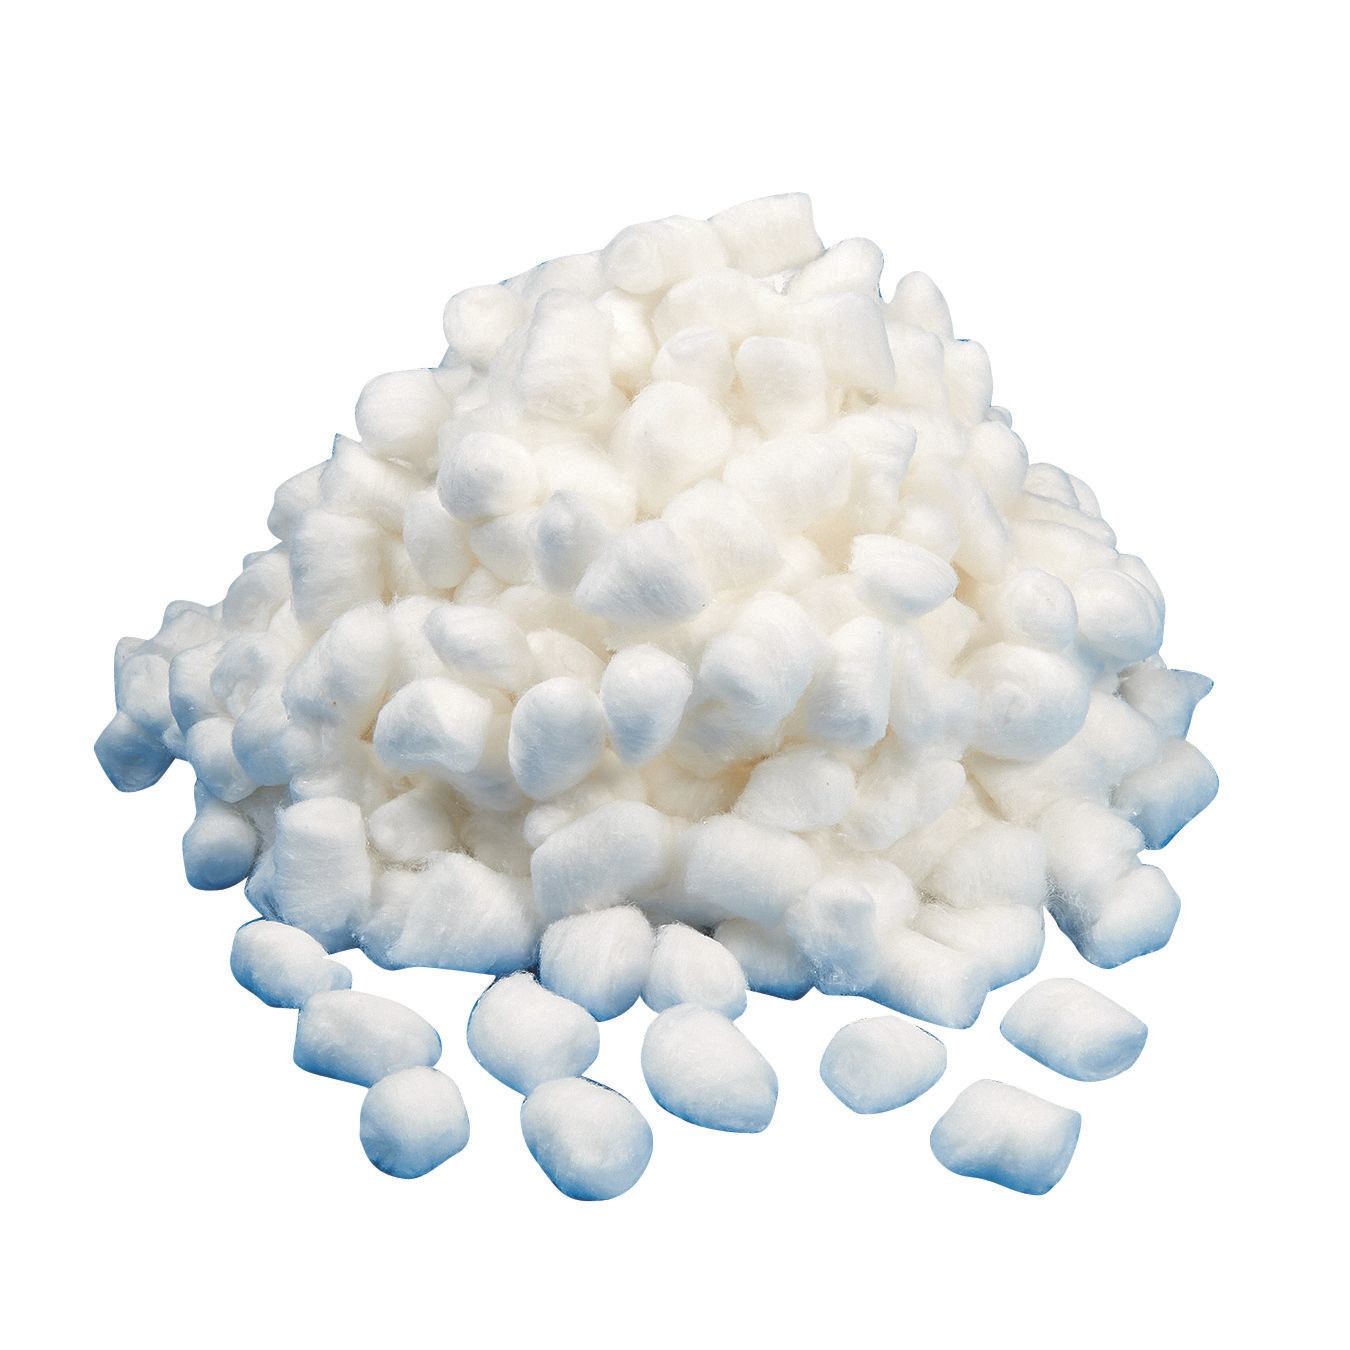 i-Spa on Instagram: BUY BULK AND SAVE! Includes 500 cotton balls